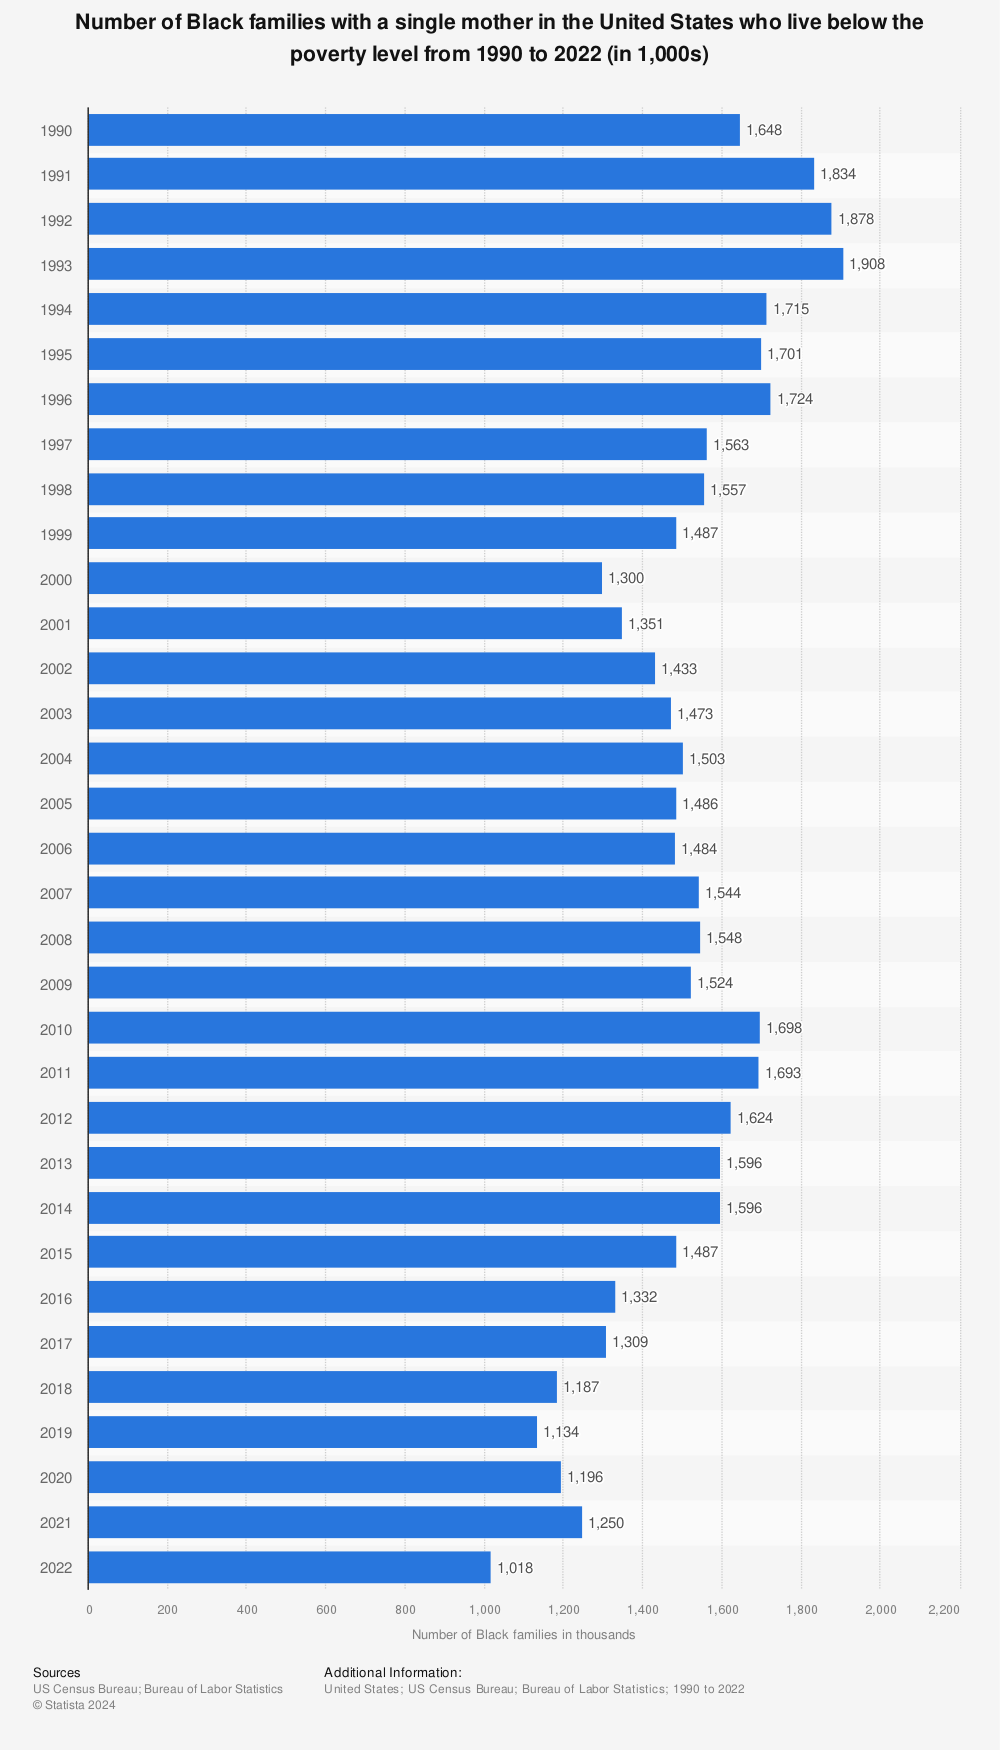 Statistic: Number of Black families with a single mother in the United States who live below the poverty level from 1990 to 2021 (in 1,000s) | Statista